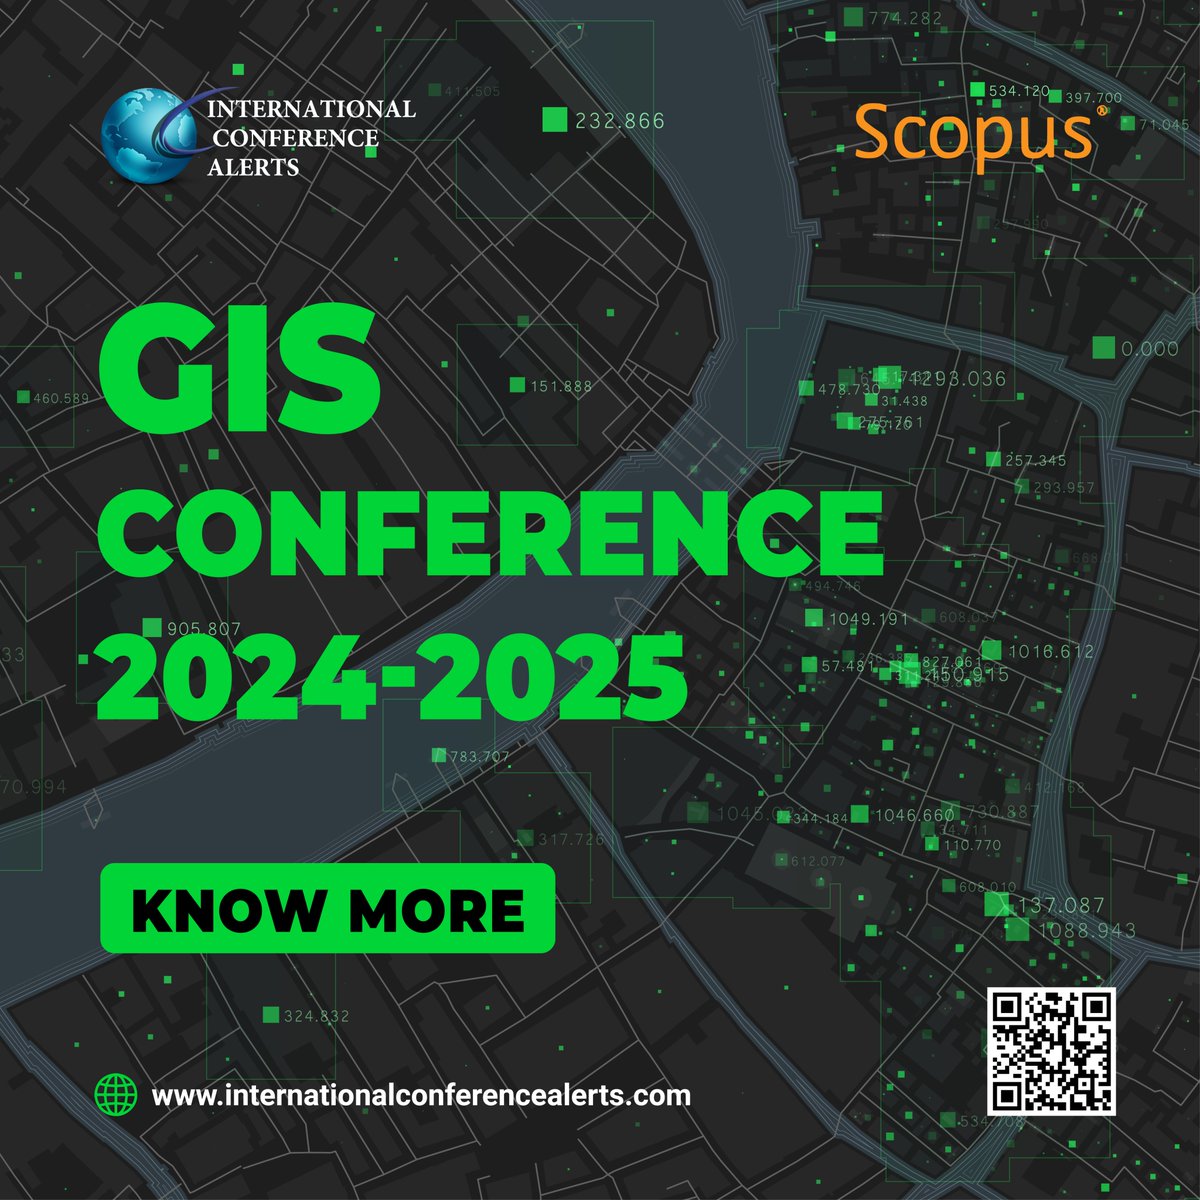 Gear up for the GIS Conference 2024-2025. . success!📌 Read more here: internationalconferencealerts.com/conference/gis | #internationalconferencealerts #conference2024 #conference2025 #gisconference #GISEducation #Scopus #scopusindexed #scopuspublication #scopusjournal